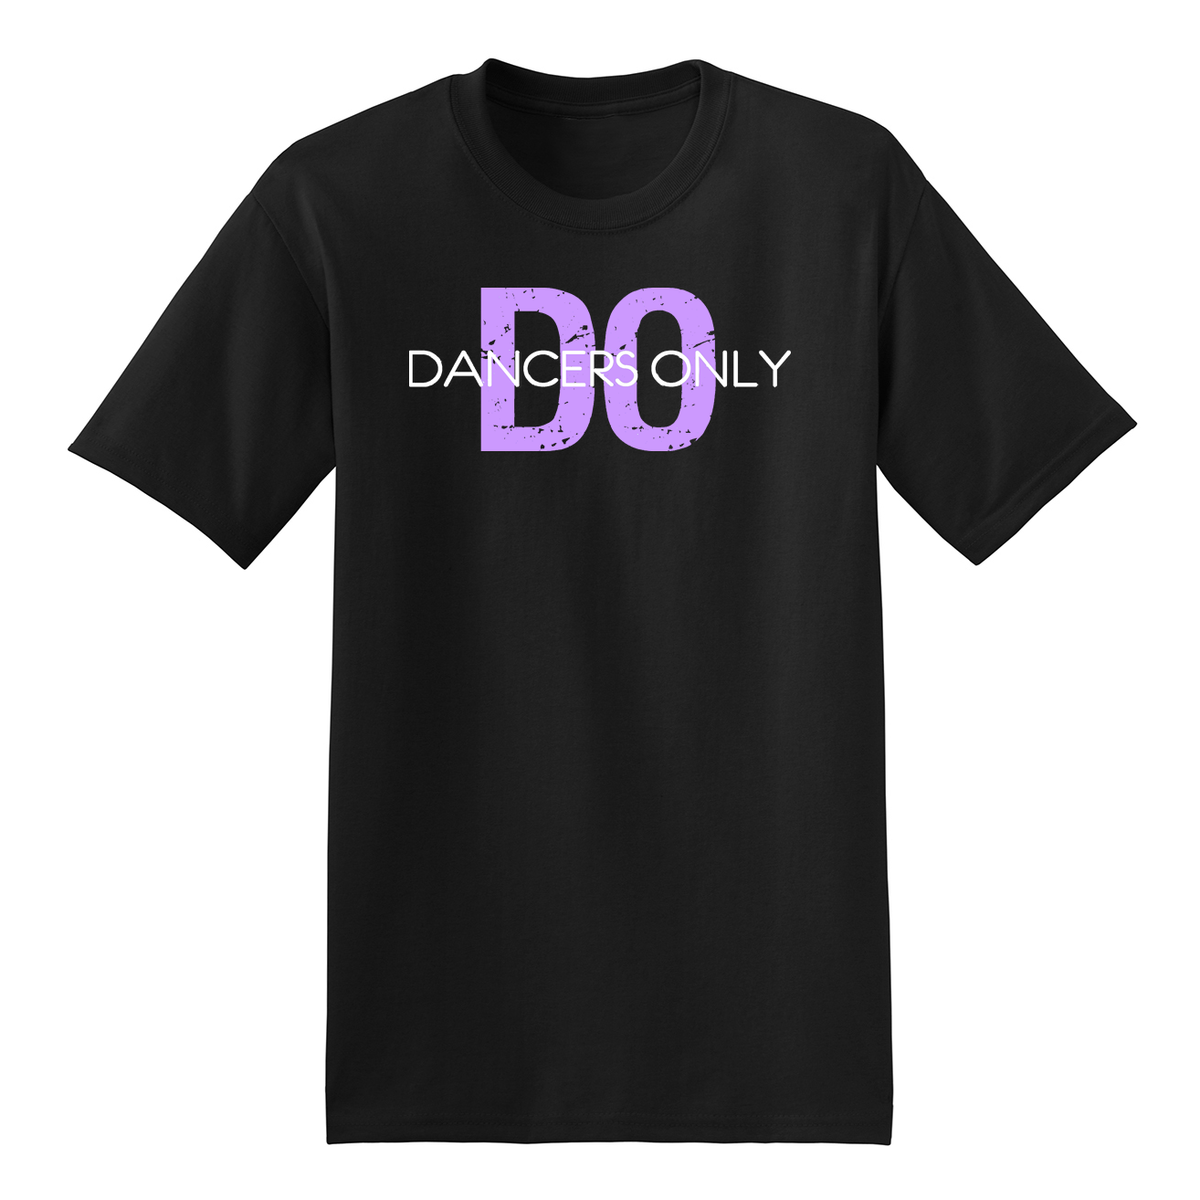 Dancers Only T-Shirt